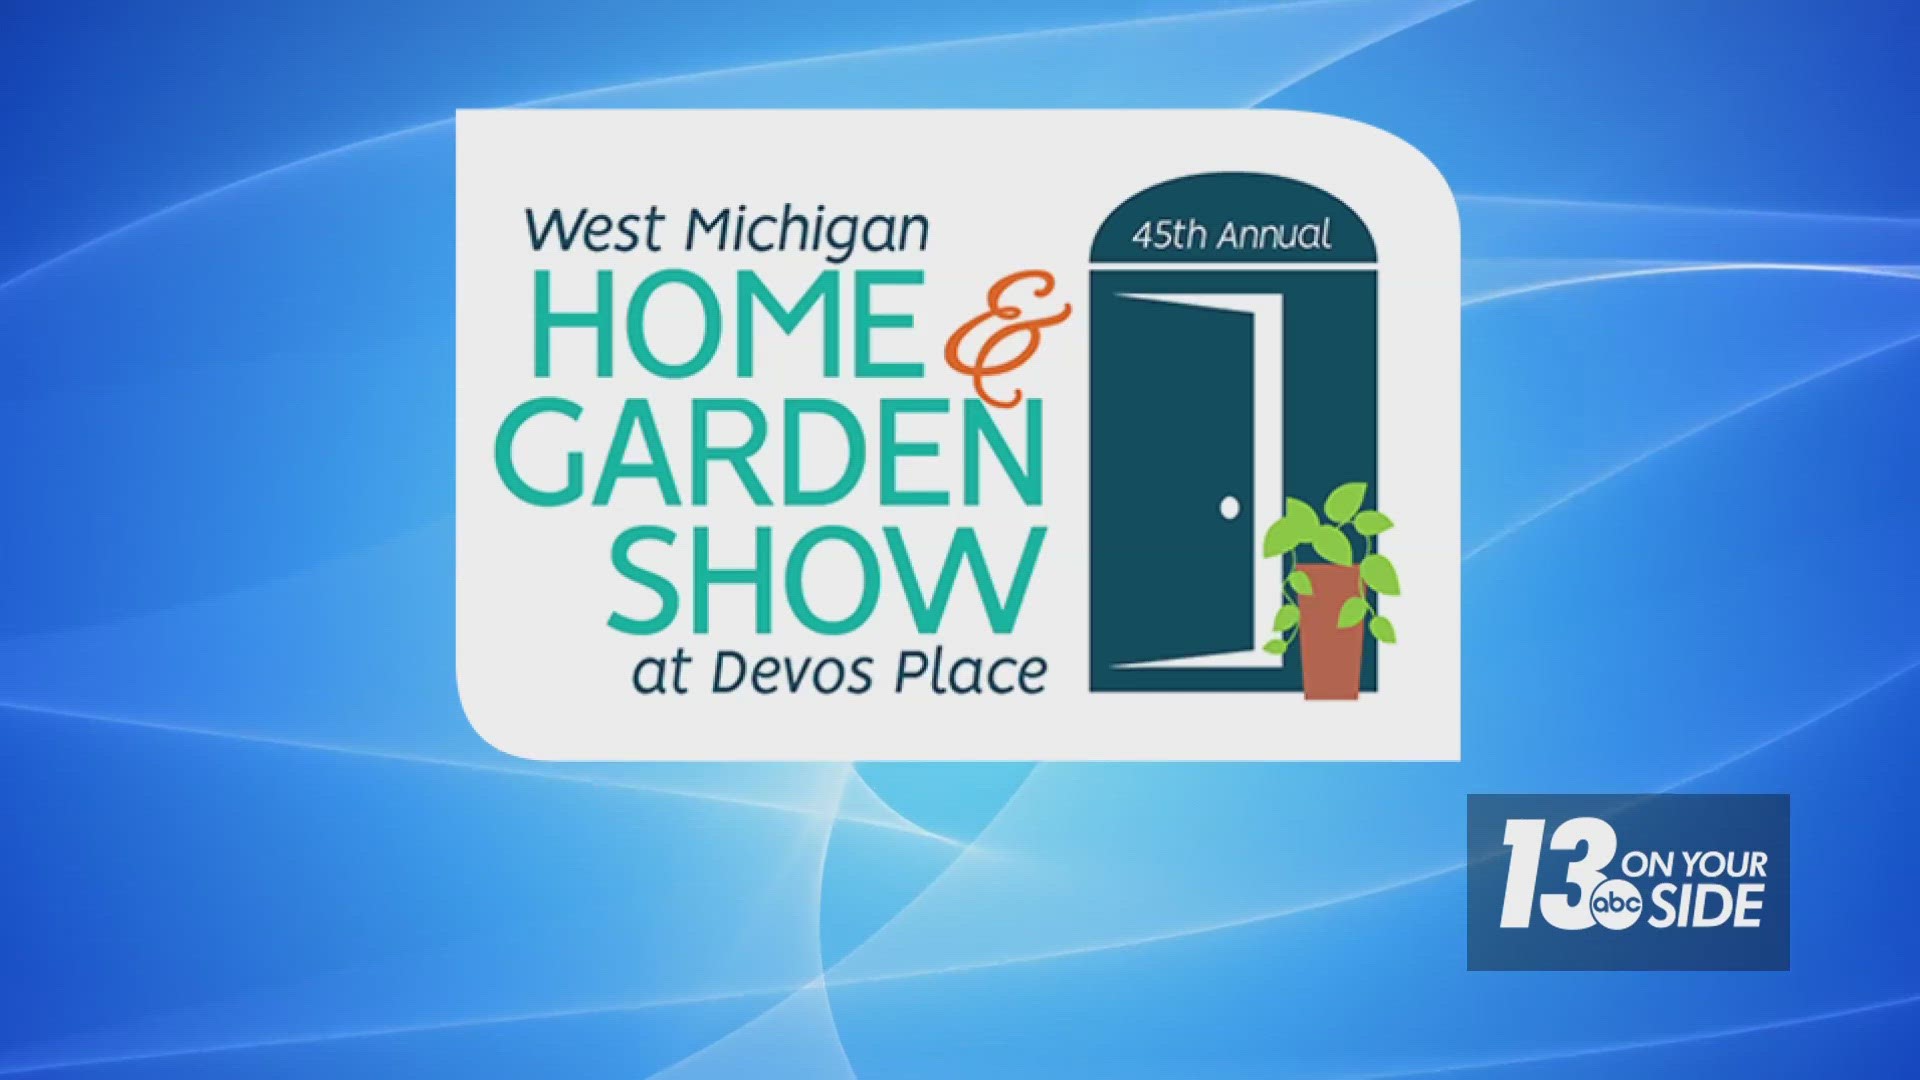 The West Michigan Home & Garden Show runs Feb. 29 through March 3 at DeVos Place in Grand Rapids